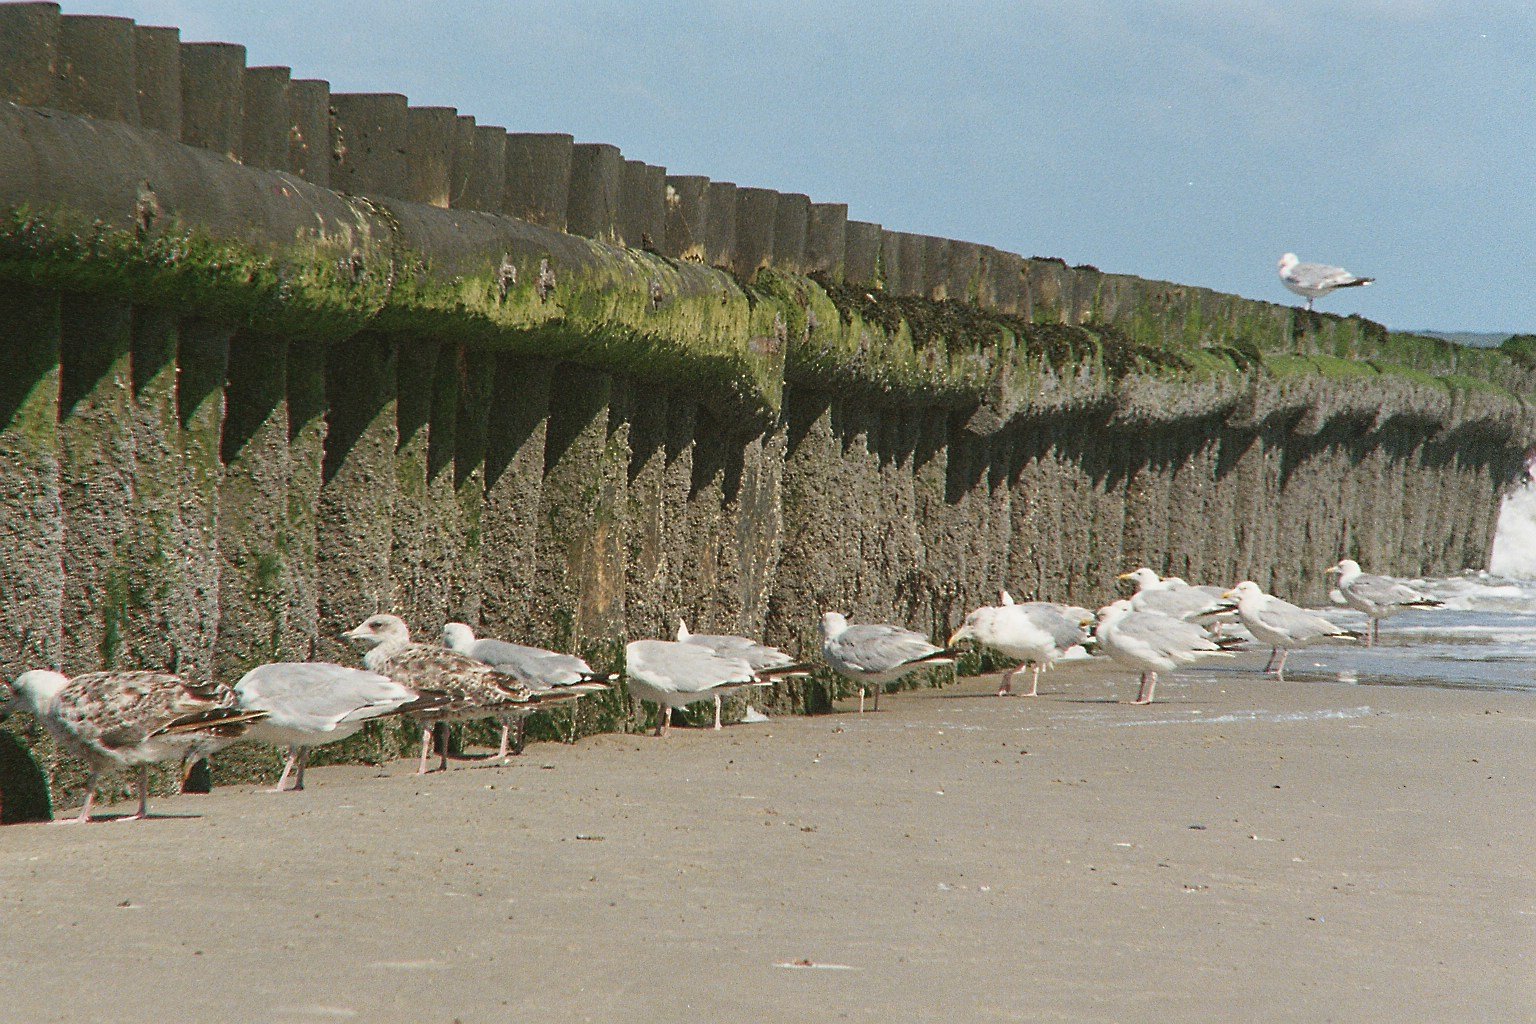 sea gulls are looking for food along the edge of the beach